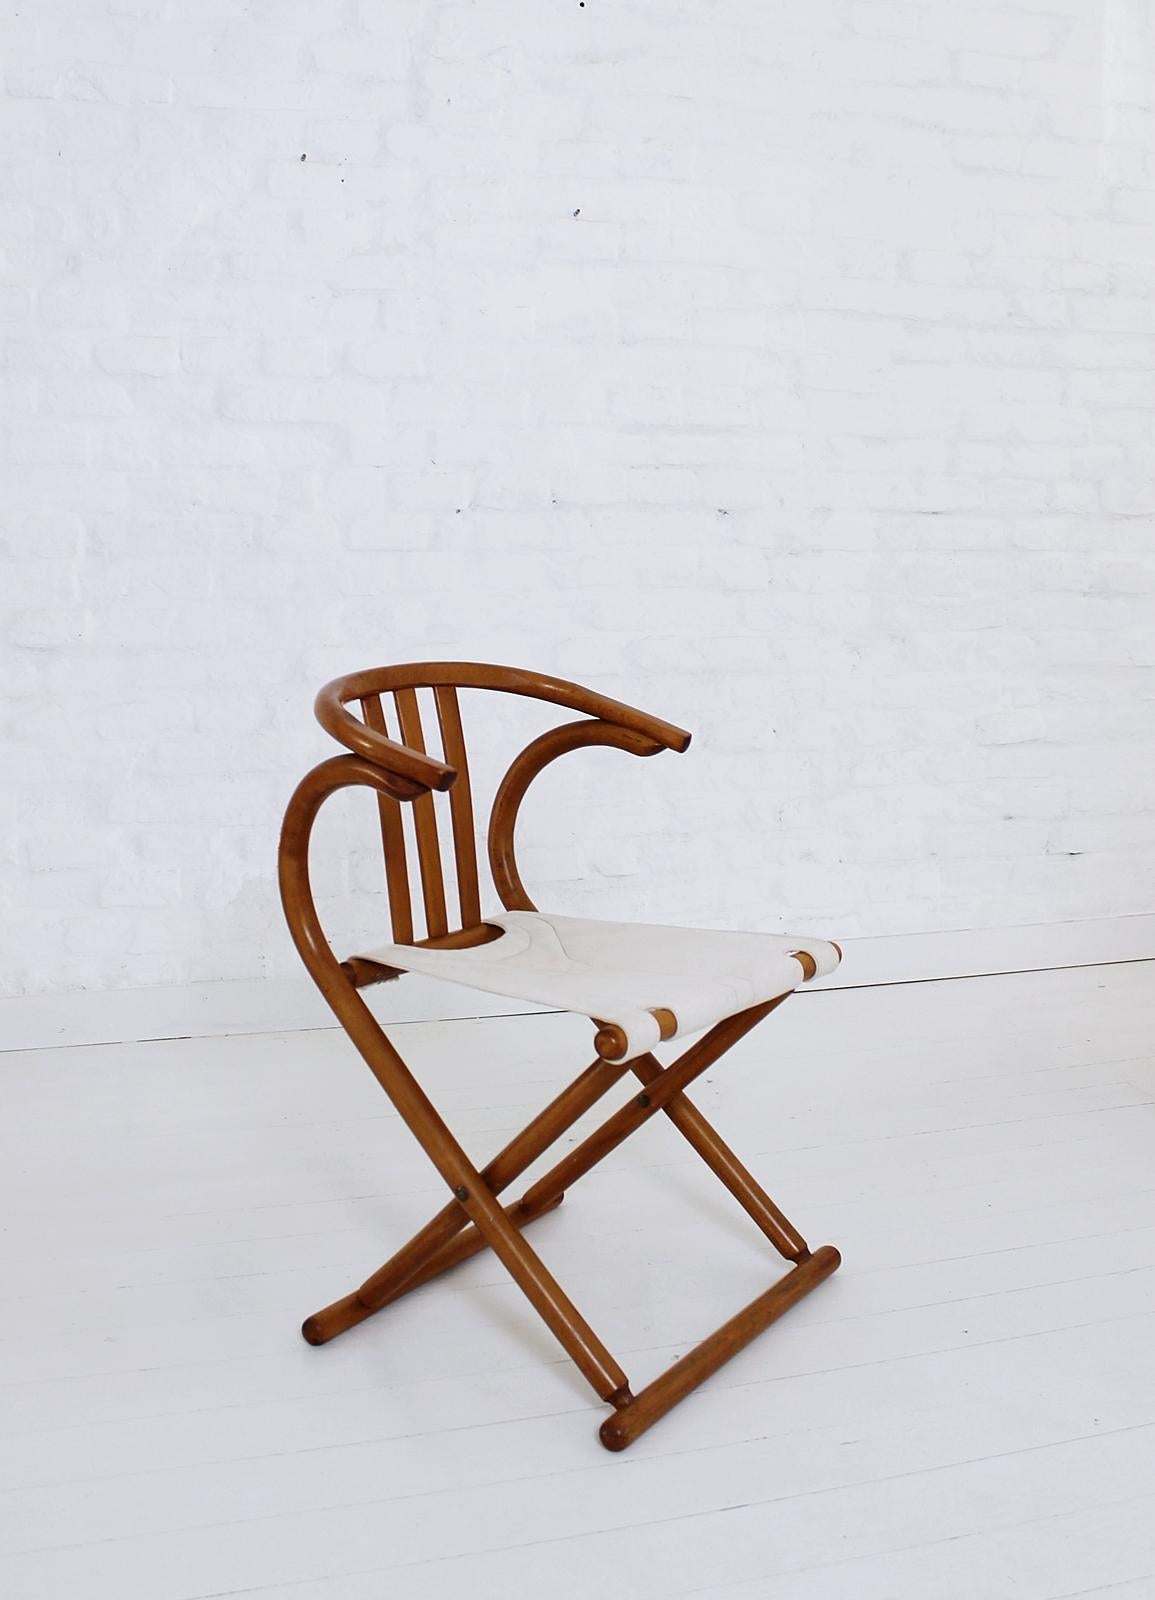 Rare vintage folding chair attributed to Thonet.
With a bent backrest and a canvas seat.

Beautiful original model made of inventively bent beechwood (a Classic Thonet technique).

Chair is in beautiful restored condition,

Measures: